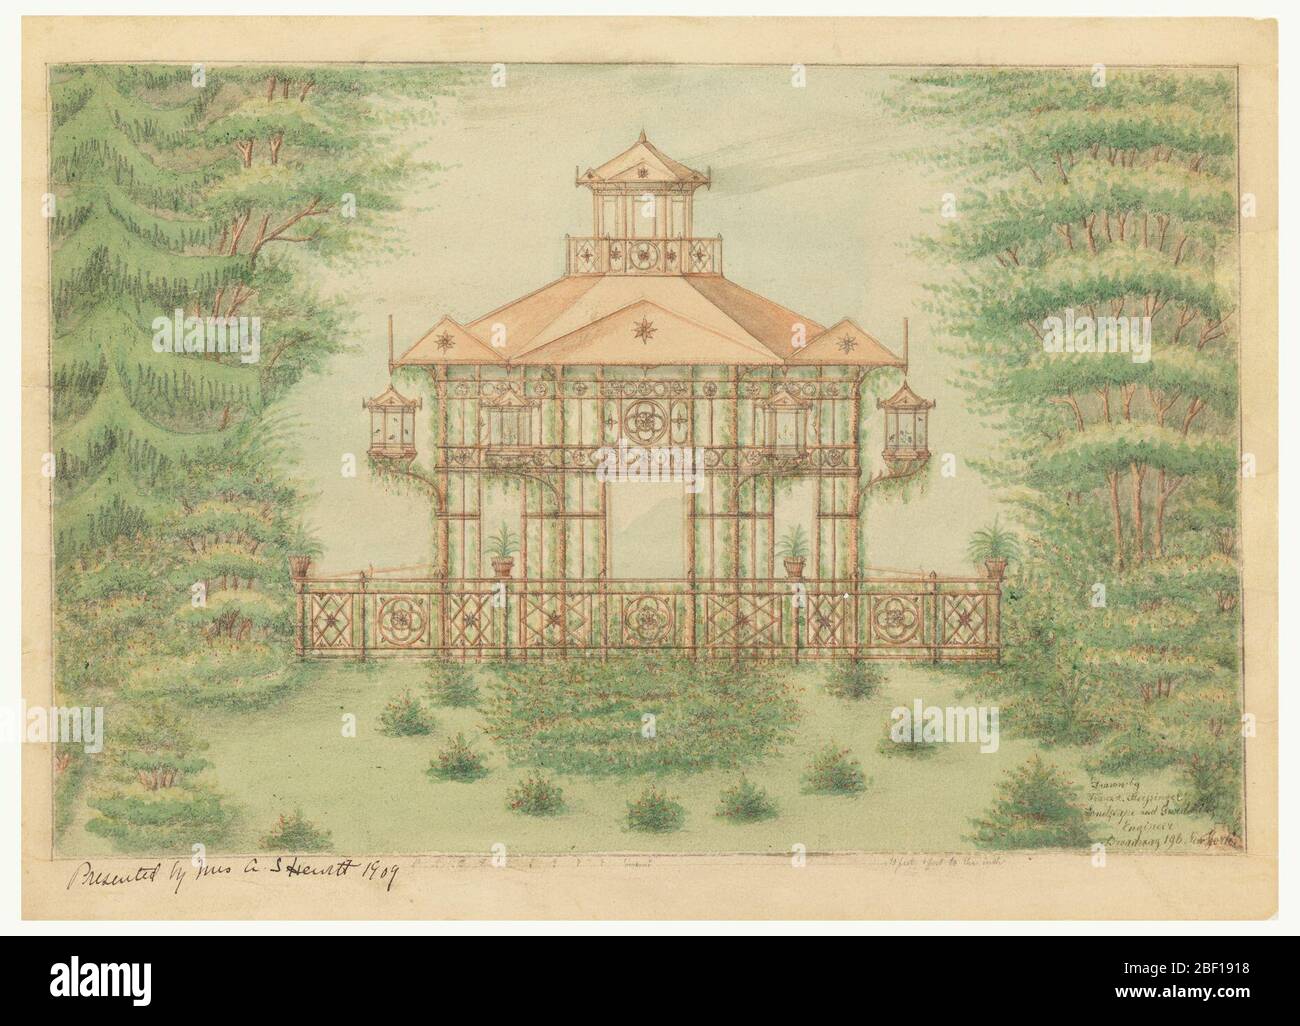 Garden Pavillion. Drawing of large pavilion surrounded by foliage. Hexagonal pavilion comprised of slanted roof supported by columns with circular design decoration and lanterns. Balustrade at base decorated with flower motif. Small level on roof of pavilion. Stock Photo